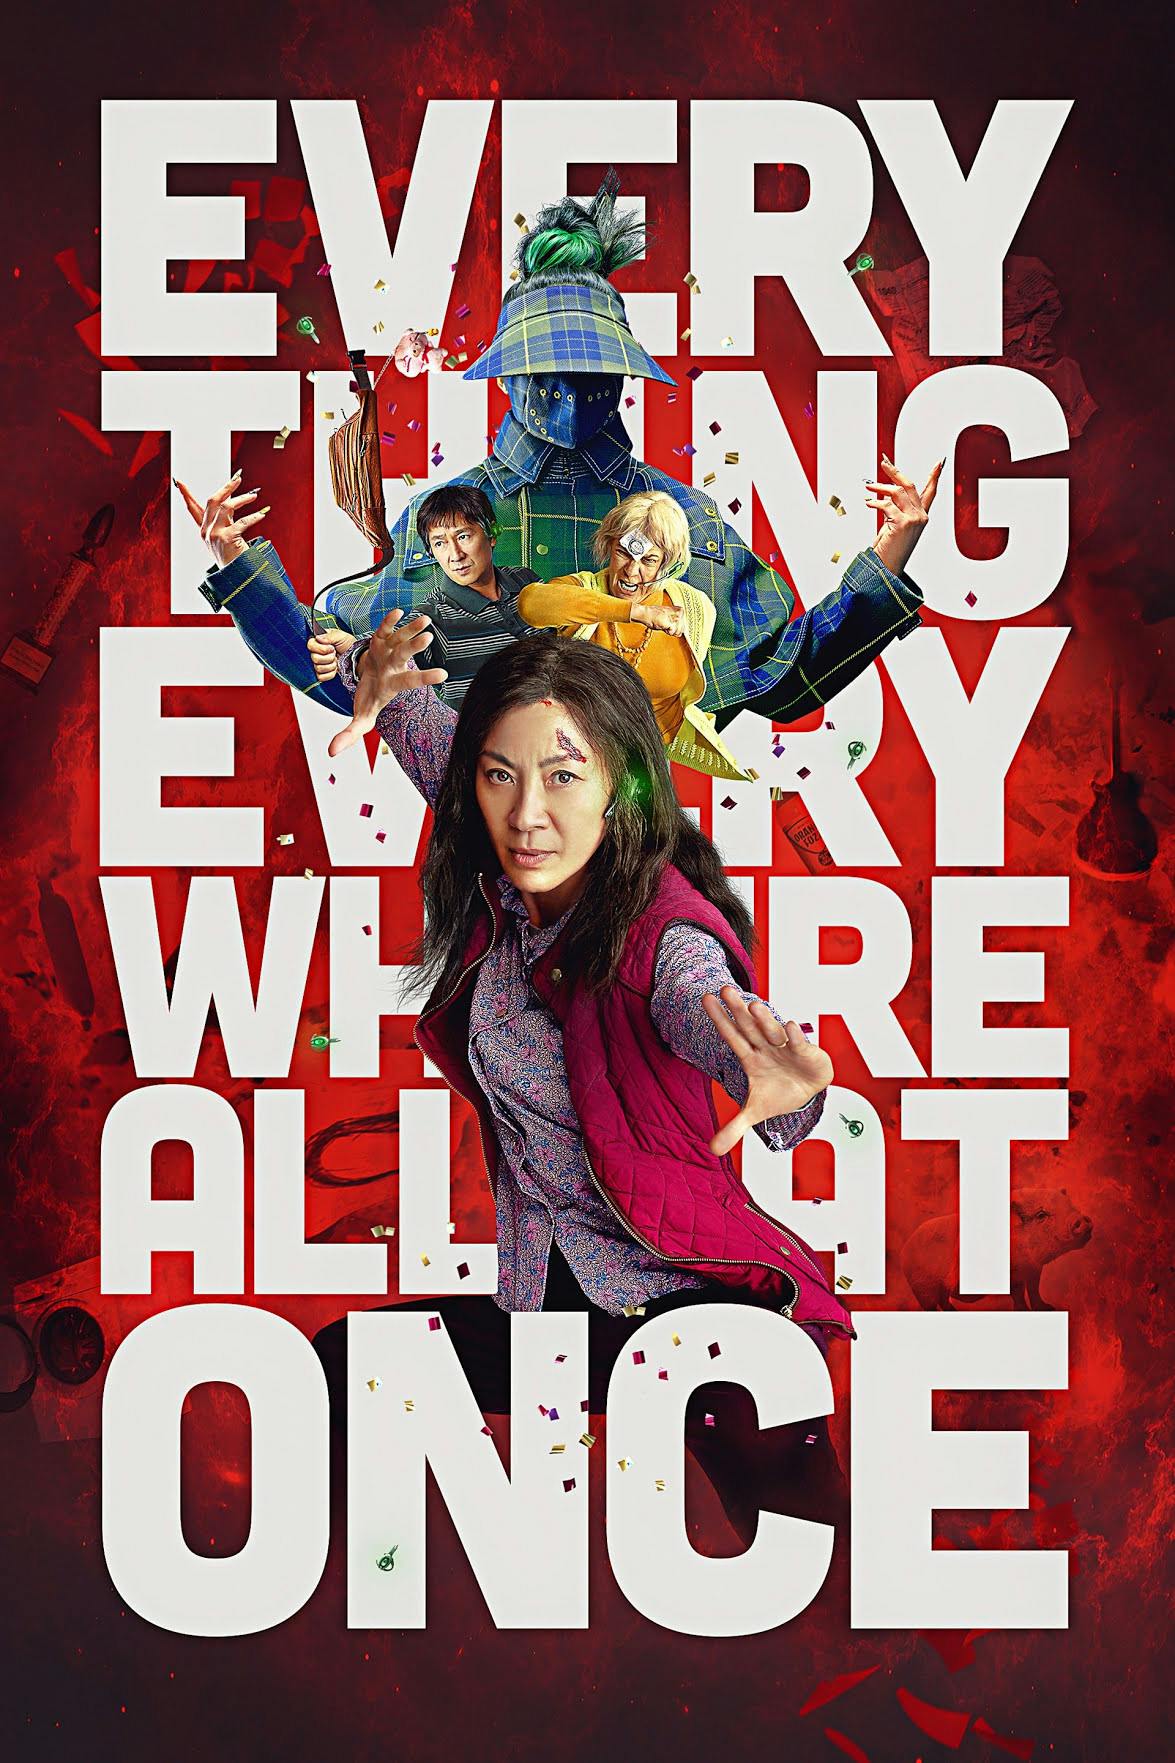 Poster for the movie, Everything Everywhere All at Once.